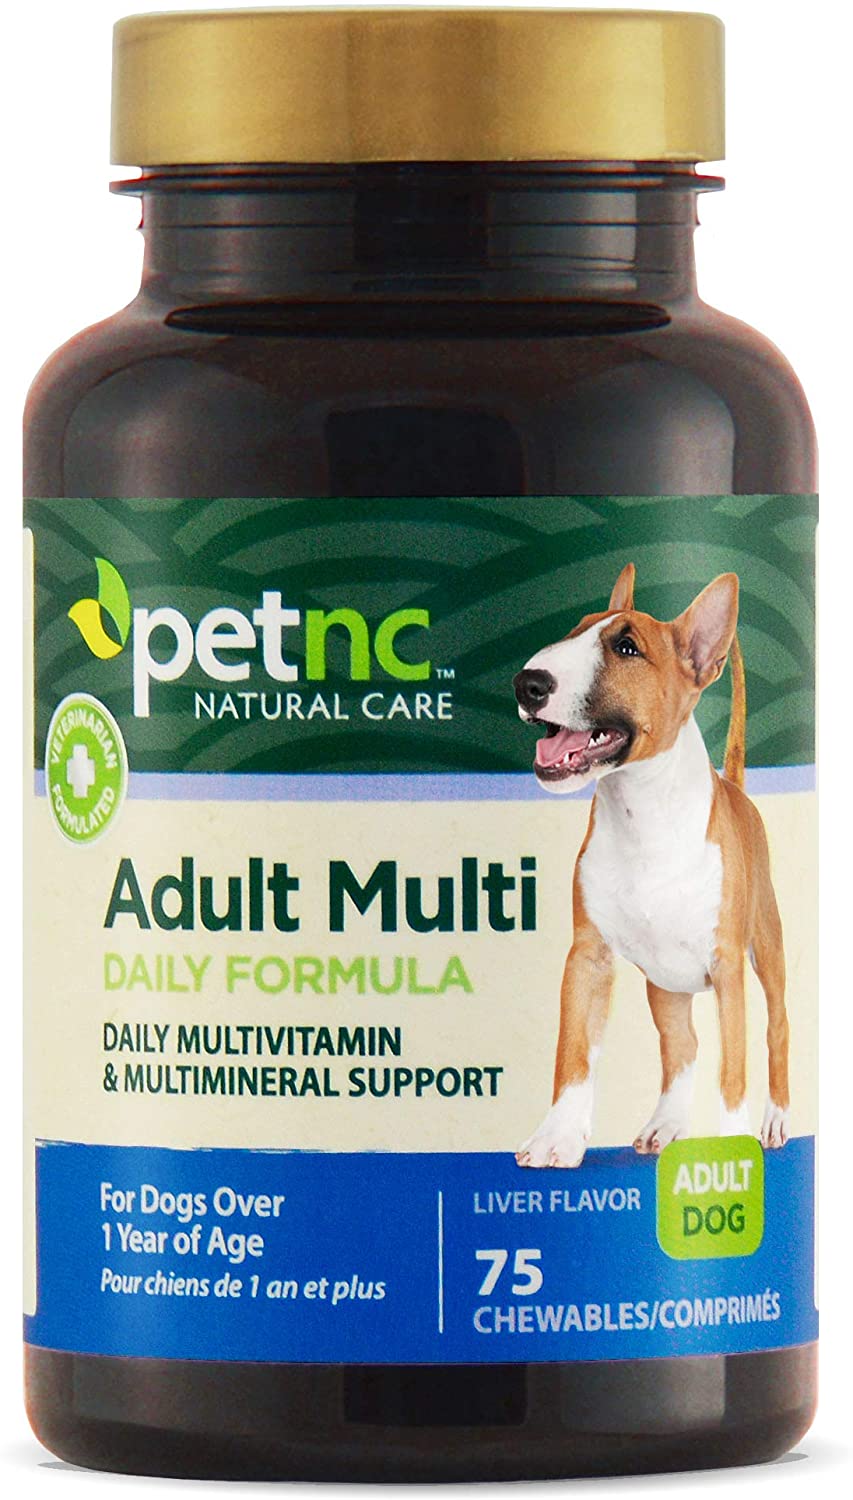 PetNC-Natural-Care-Adult-Multi-Chewables-for-Dogs